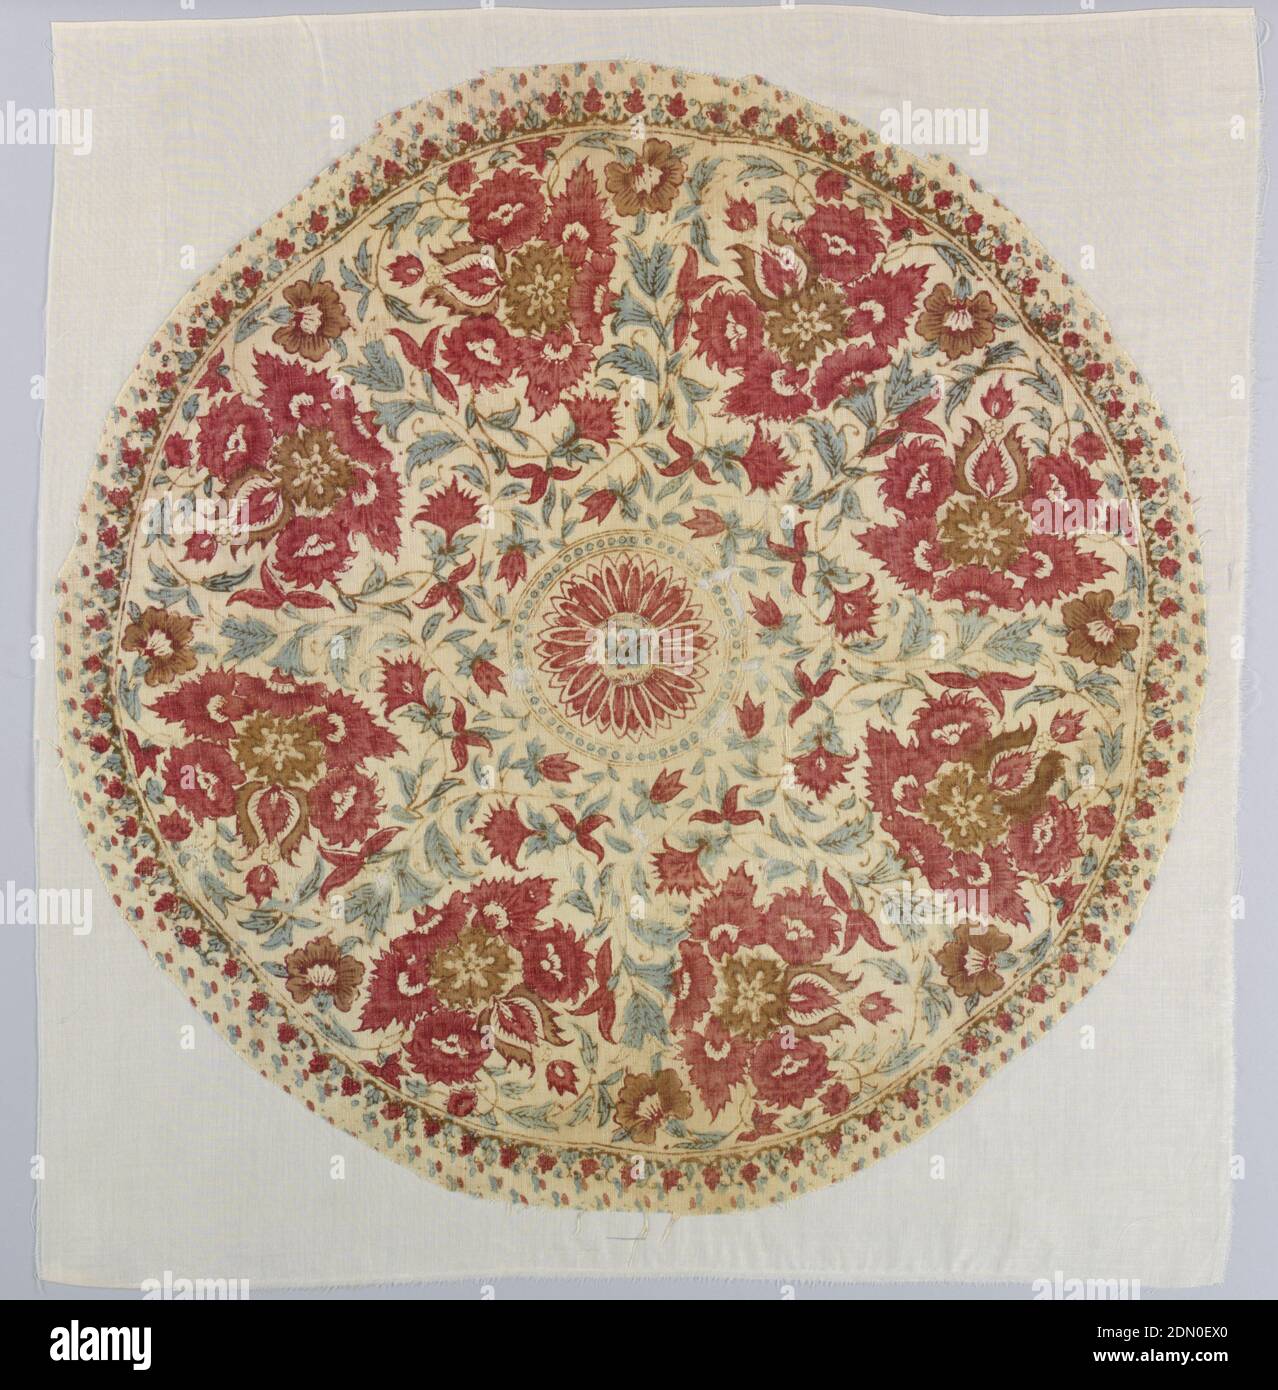 Fragment, Medium: cotton Technique: block printed on plain weave, Round fragment of cream-colored cotton block printed in reds, violet, and green. A floral pattern is arranged to fill a circle of flower heads. Center round medallion has a stylized flower head forming a rosette., India, 19th century, printed, dyed & painted textiles, Fragment Stock Photo